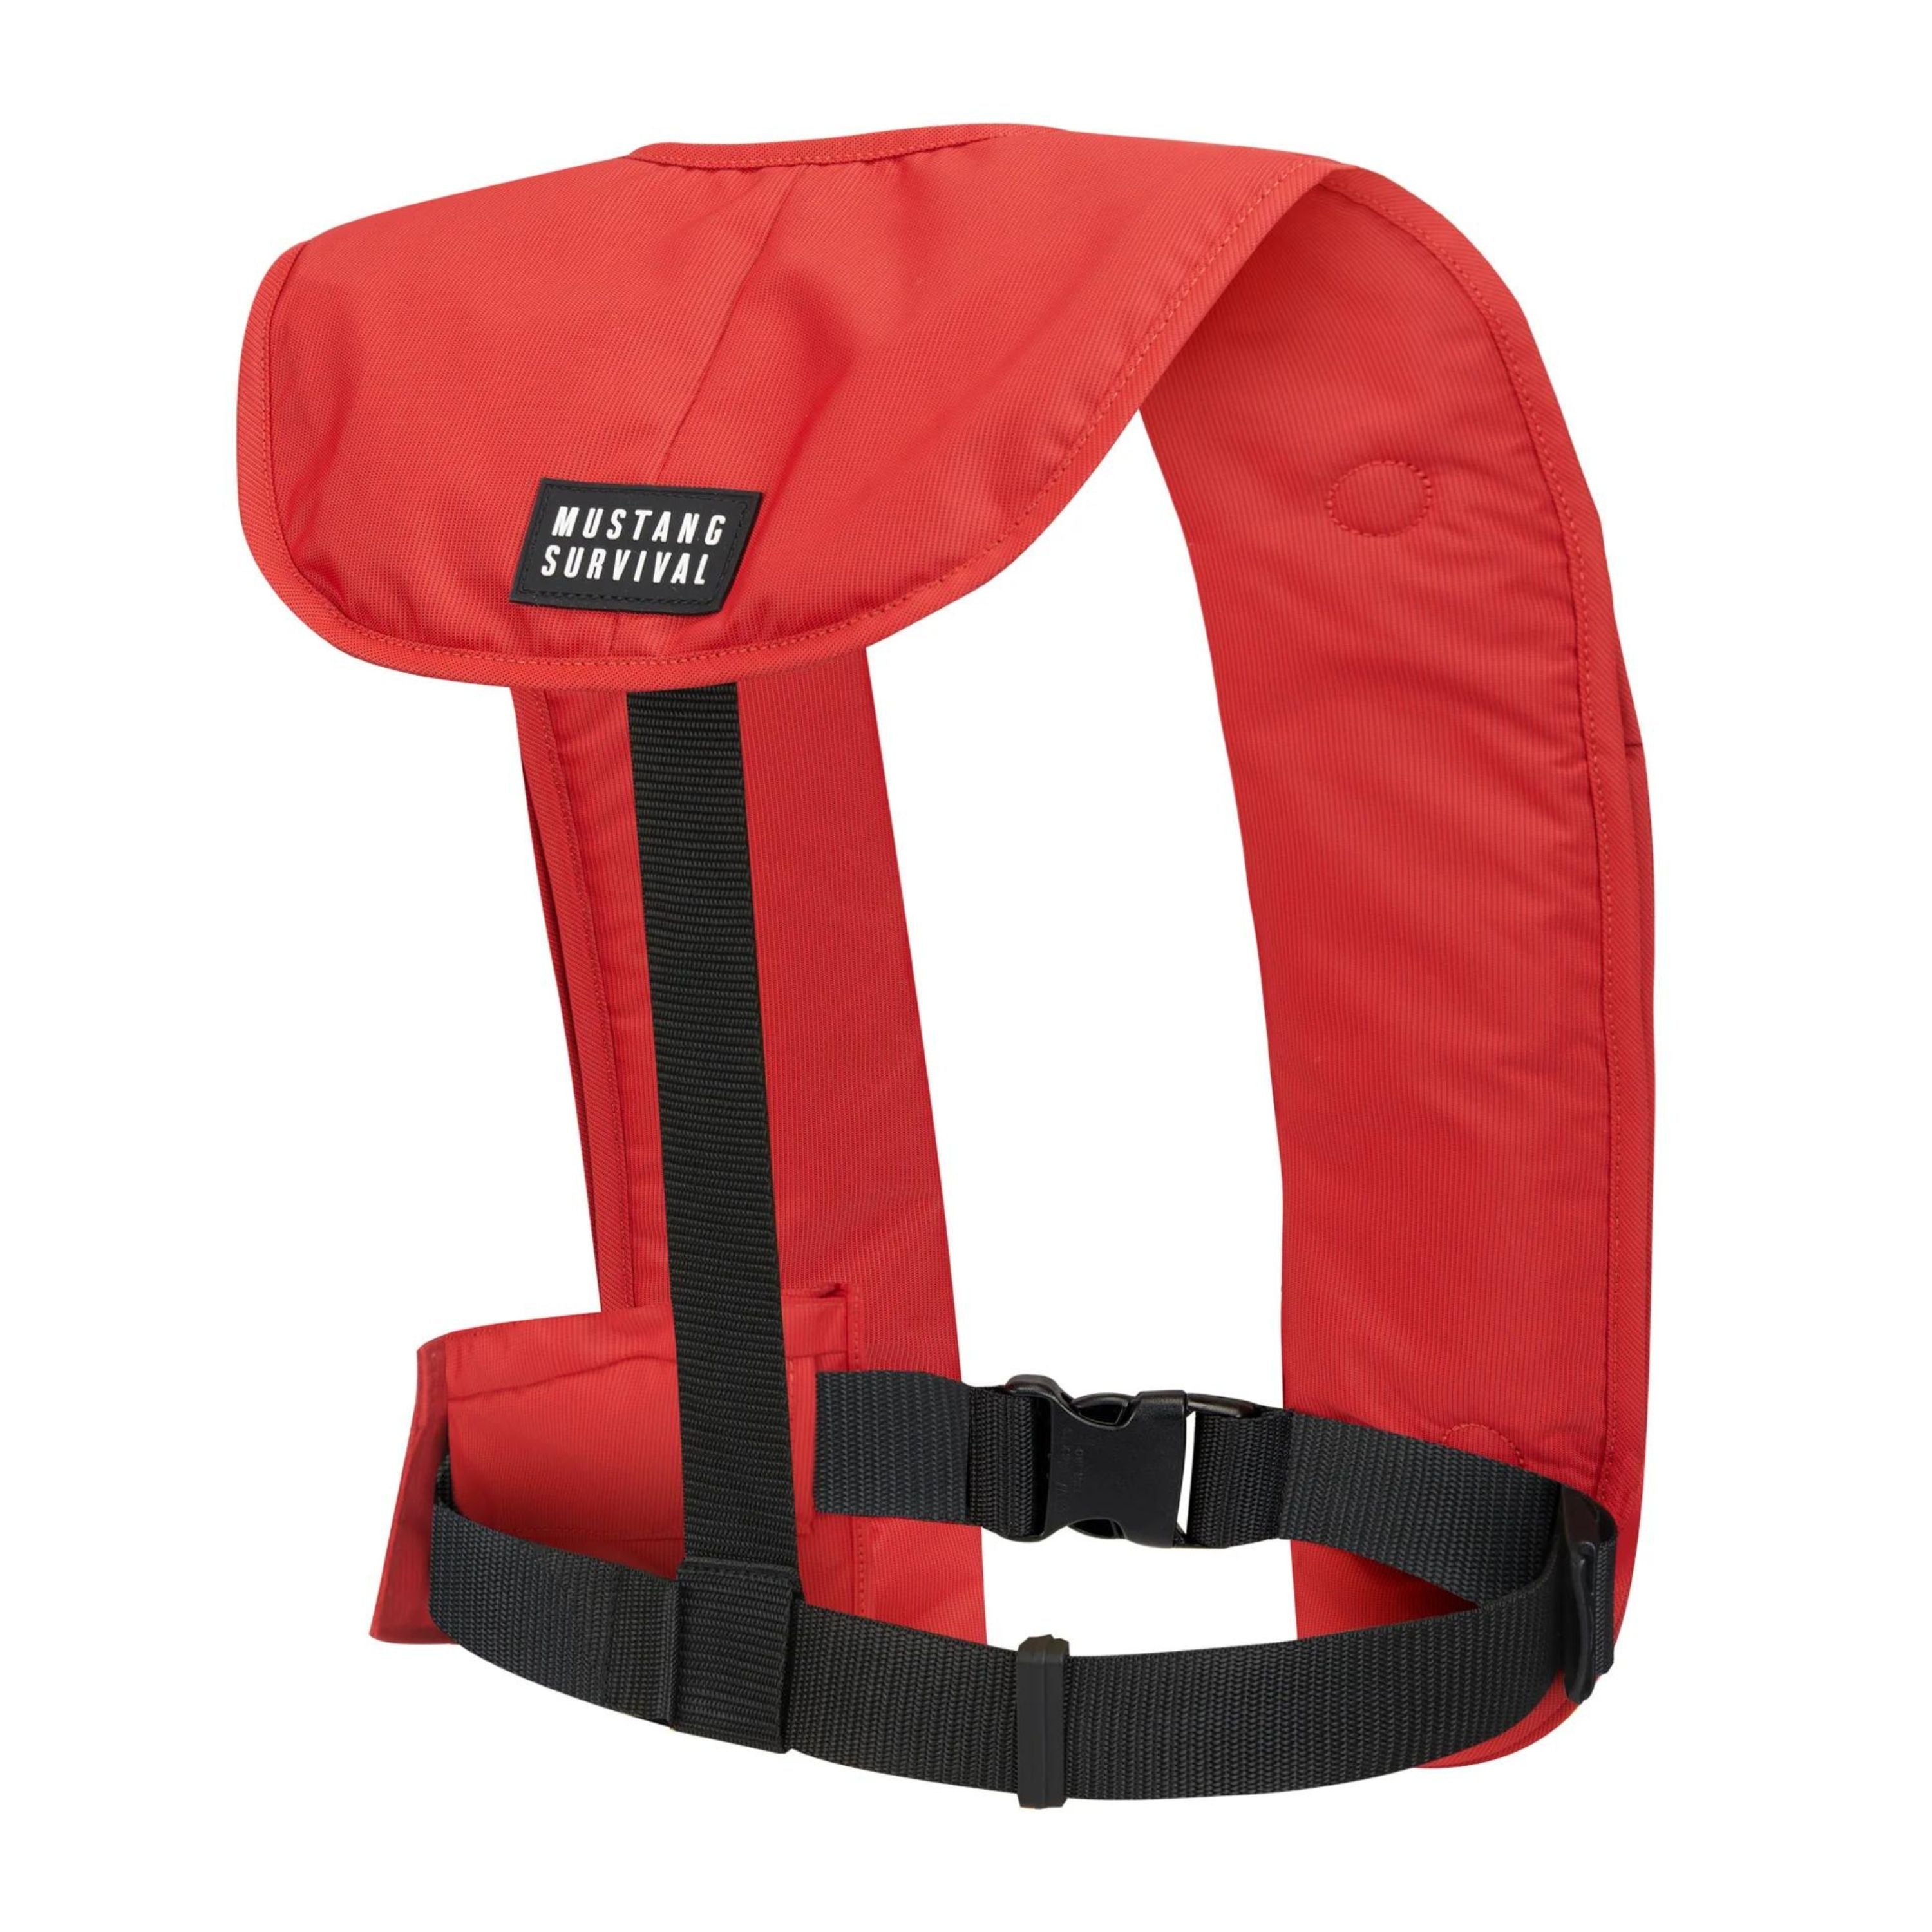 "MIT 100" inflatable PFD convertible automatic/manual